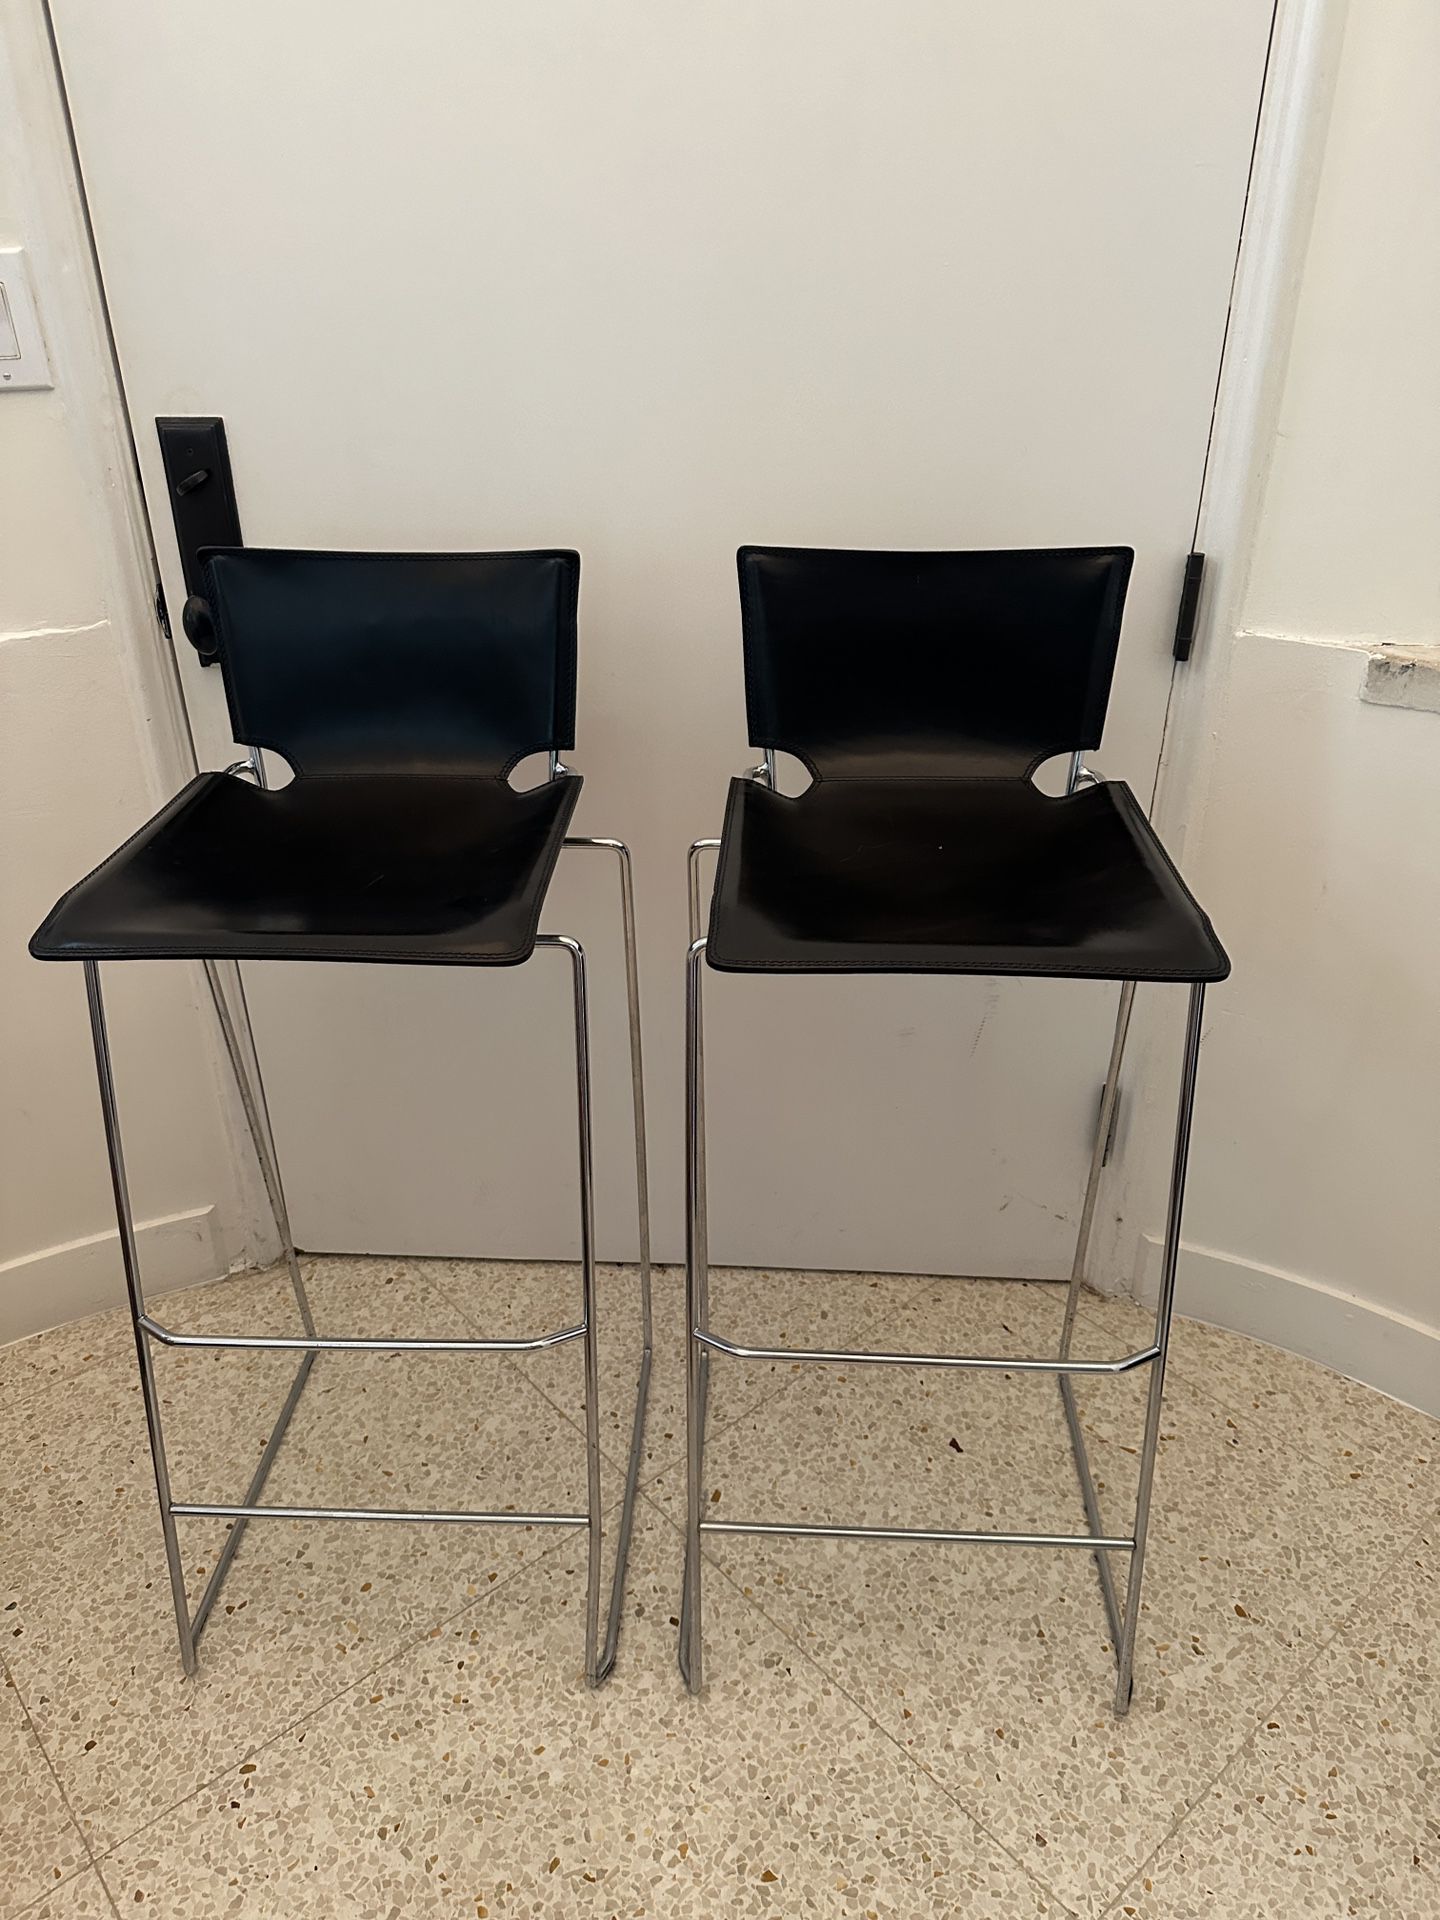 2 Modern Chrome And Leather Bar Stools